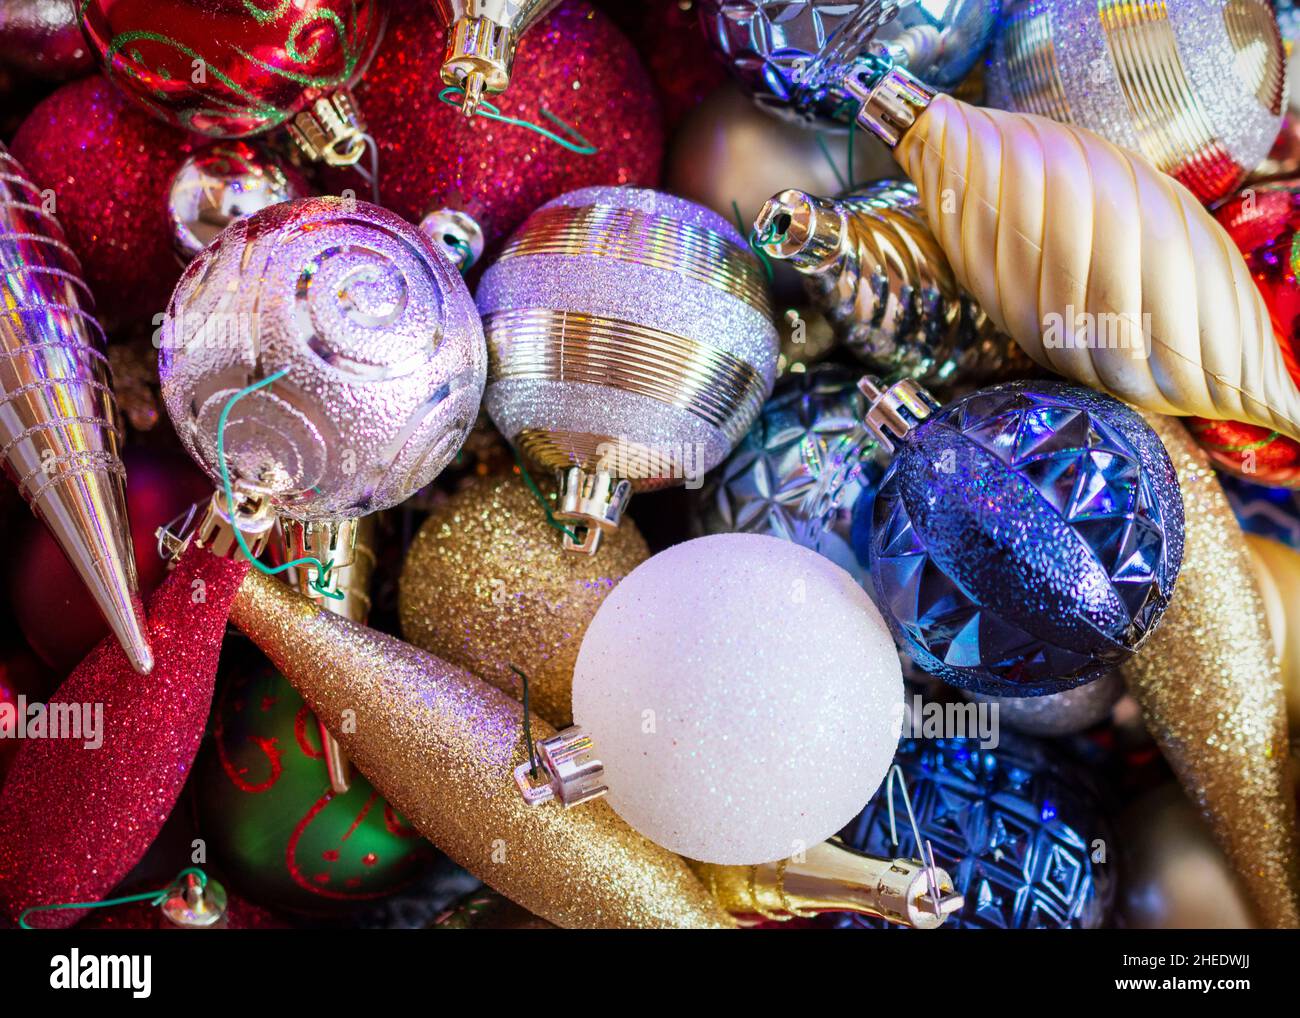 A collection of Christmas tree ornaments. Stock Photo